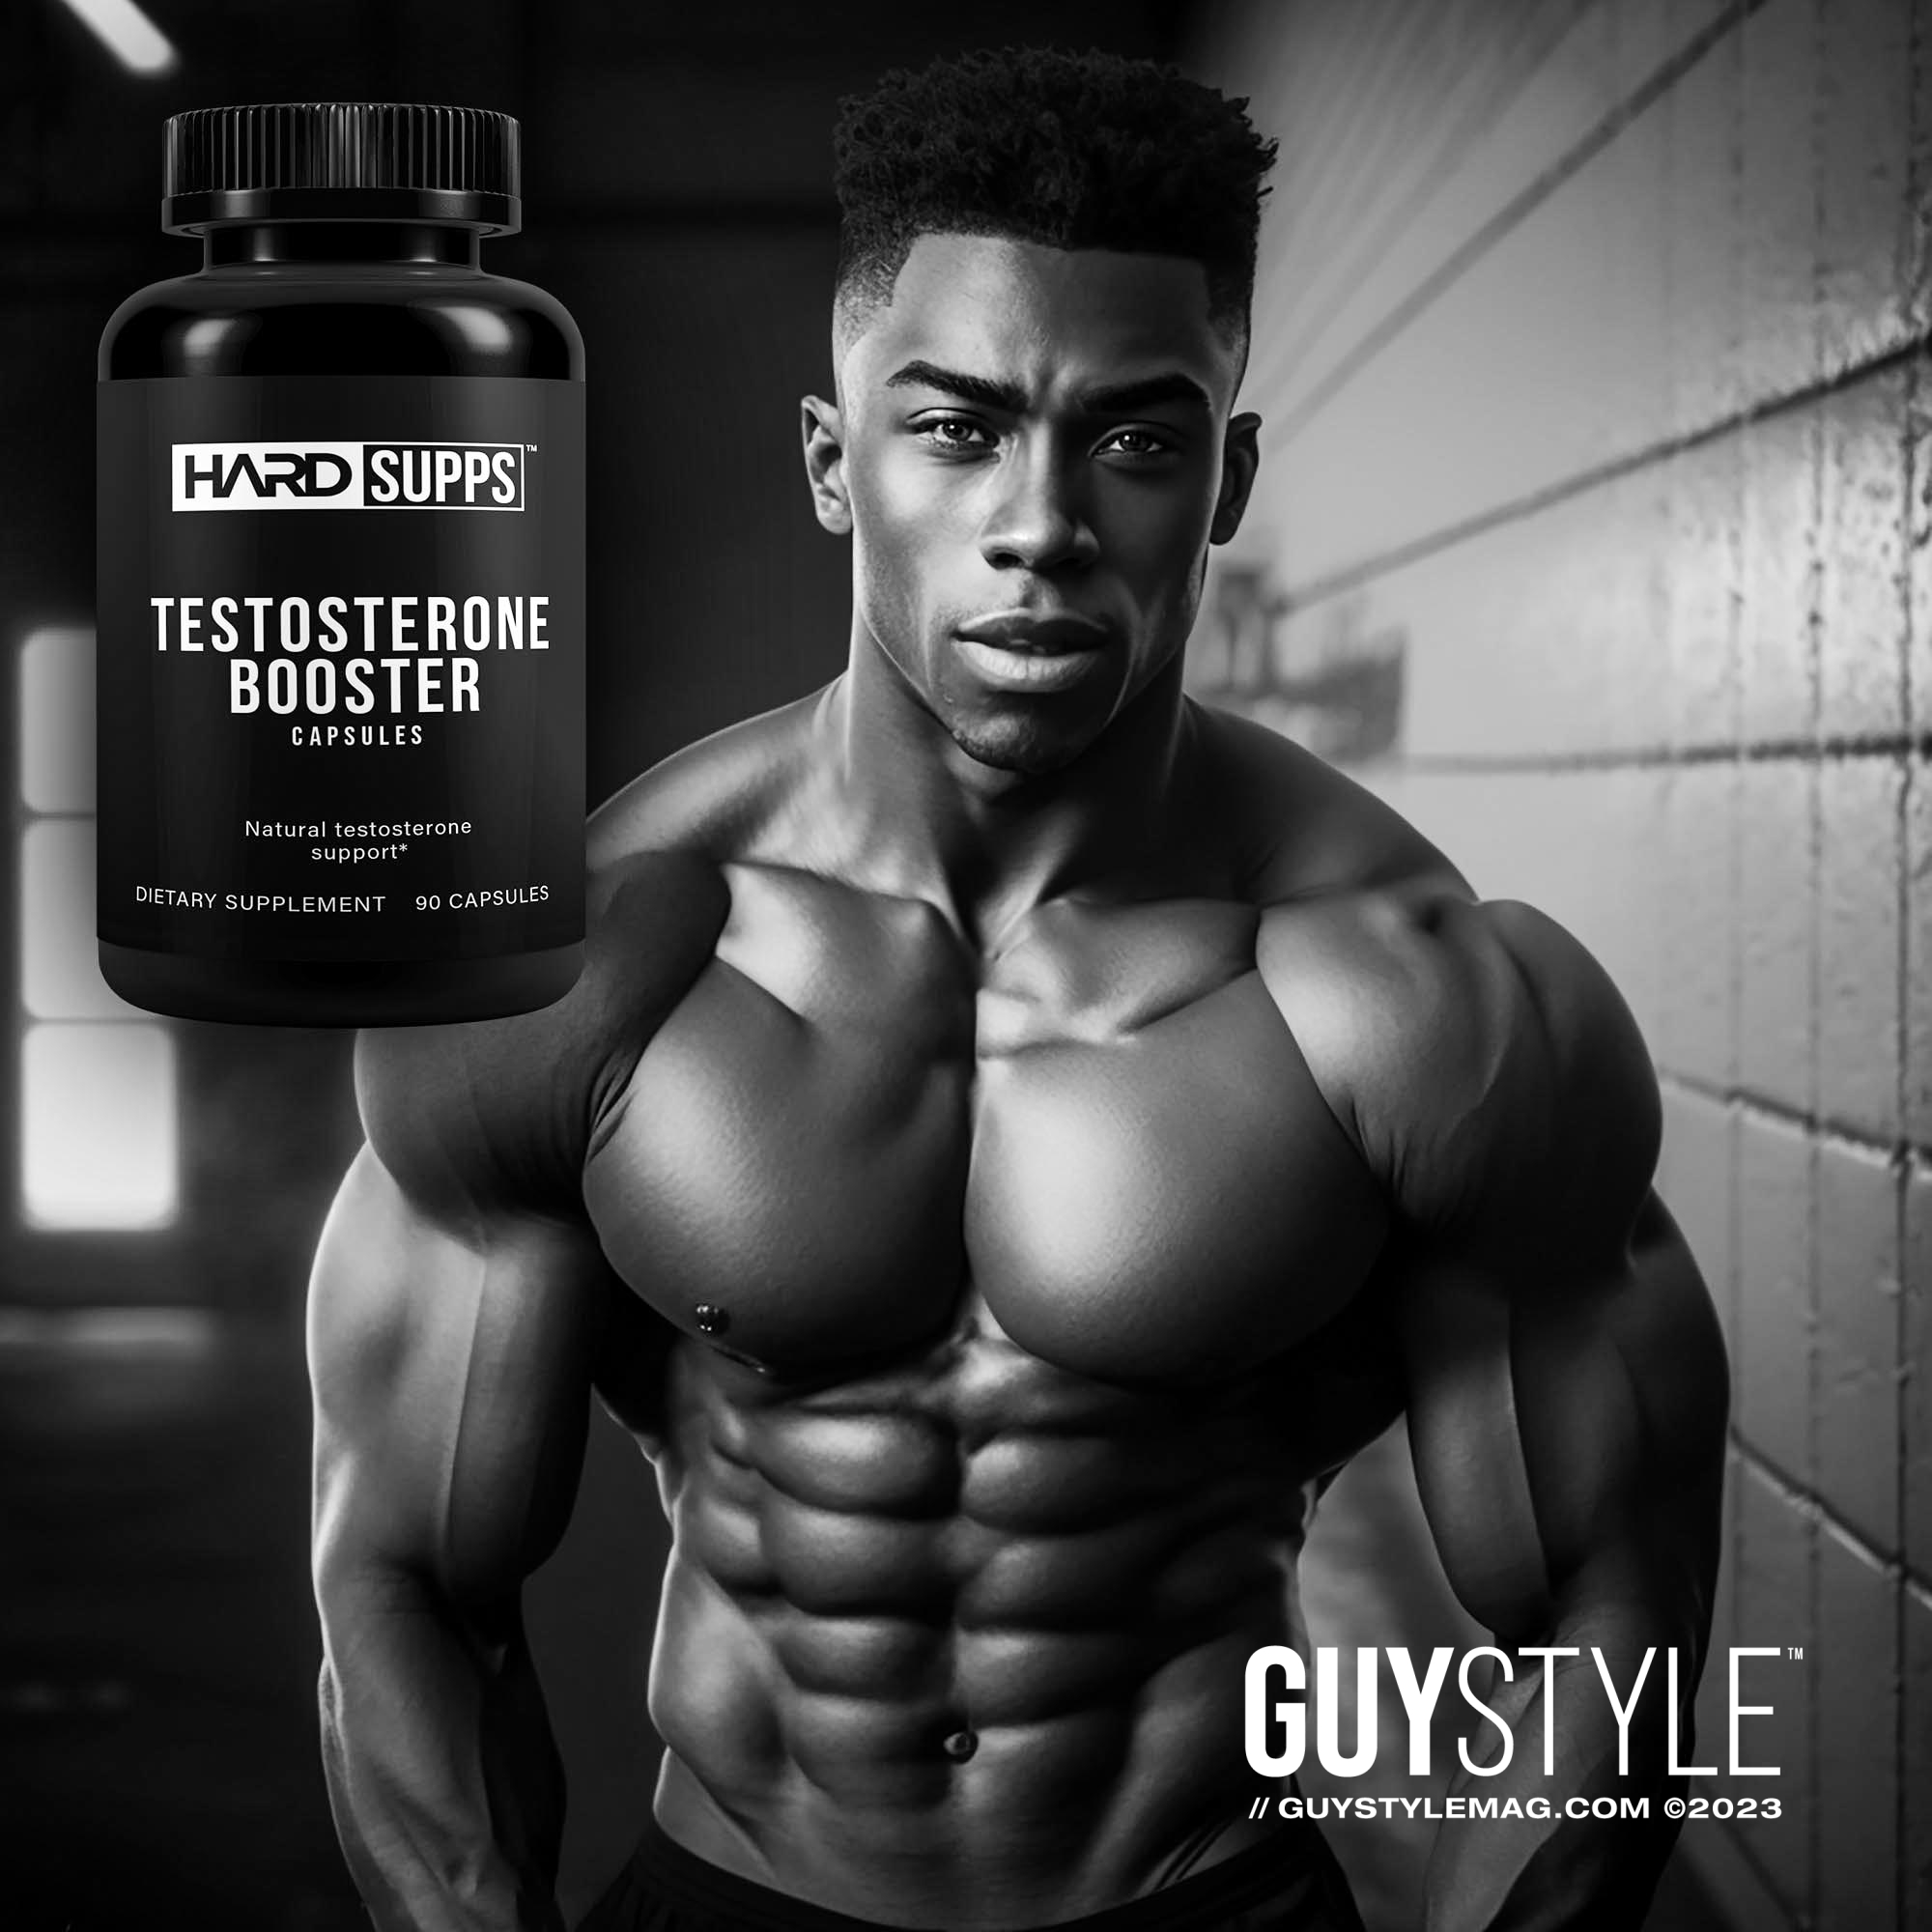 Starting Your Day Right: Setting the Tone for Bodybuilding Success – Bodybuilding 101 with Coach Maxwell Alexander – Presented by Natural Testosterone Booster from HARD SUPPS